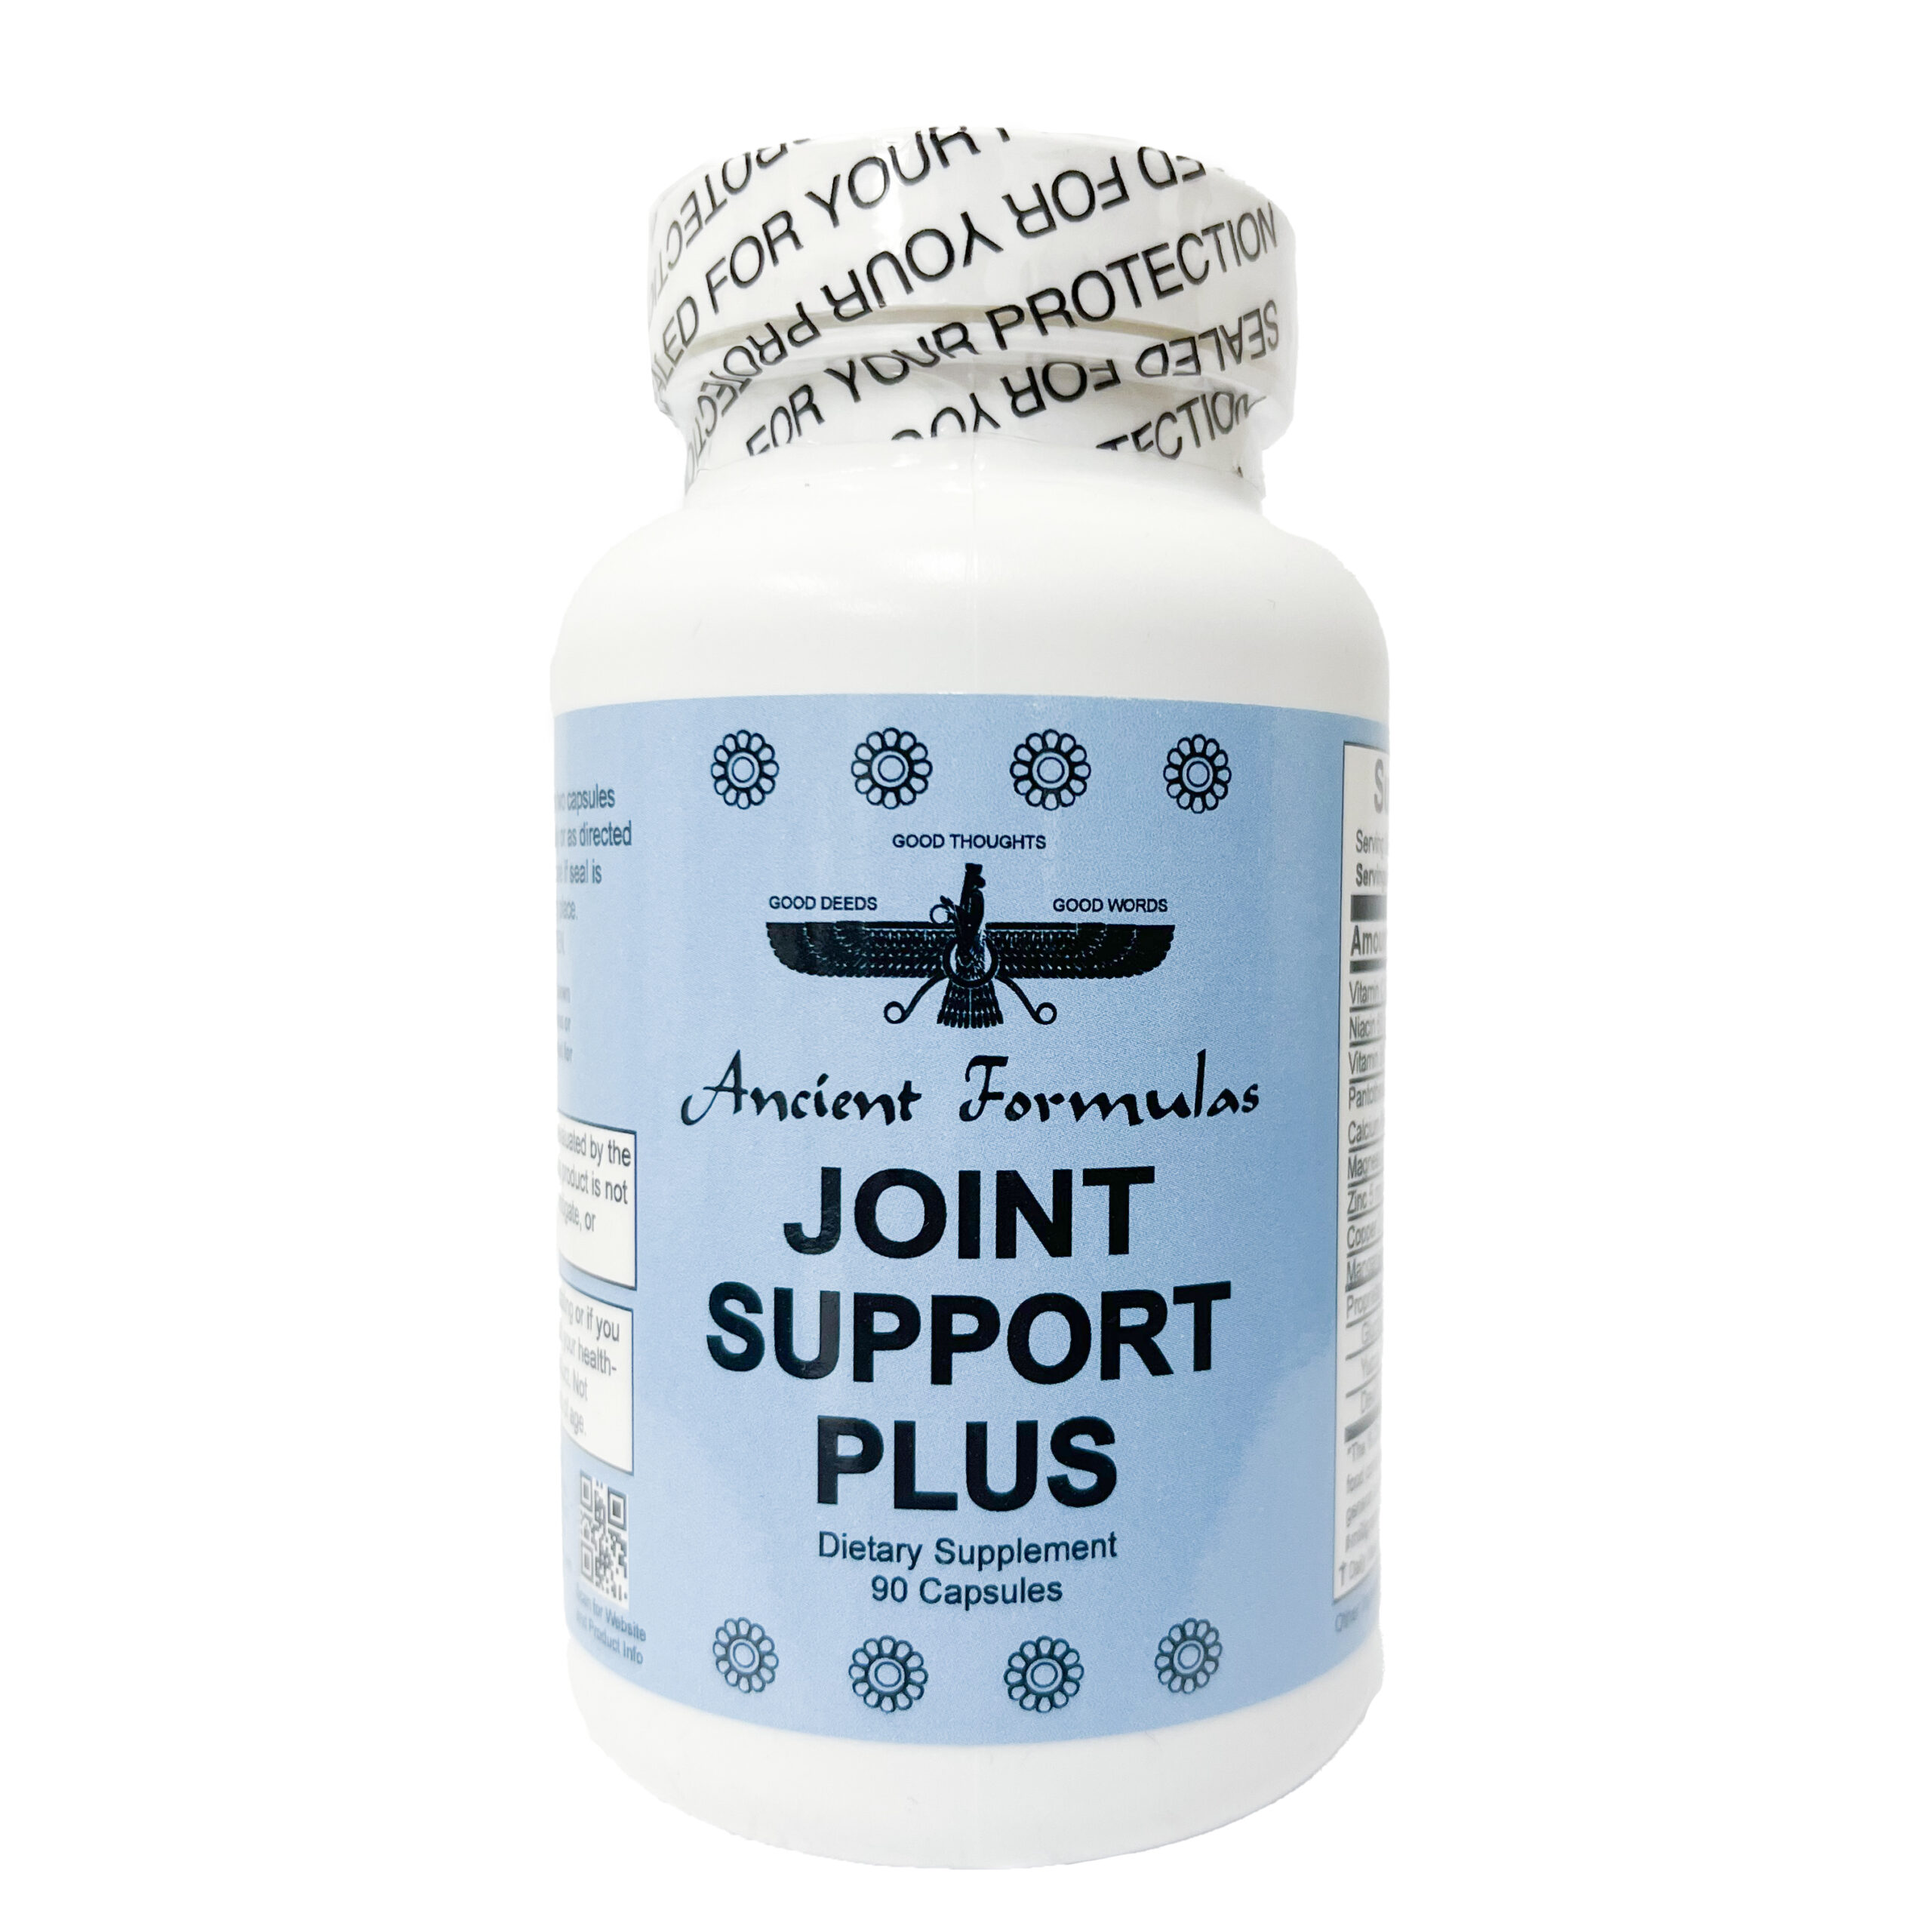 Joint Support Plus